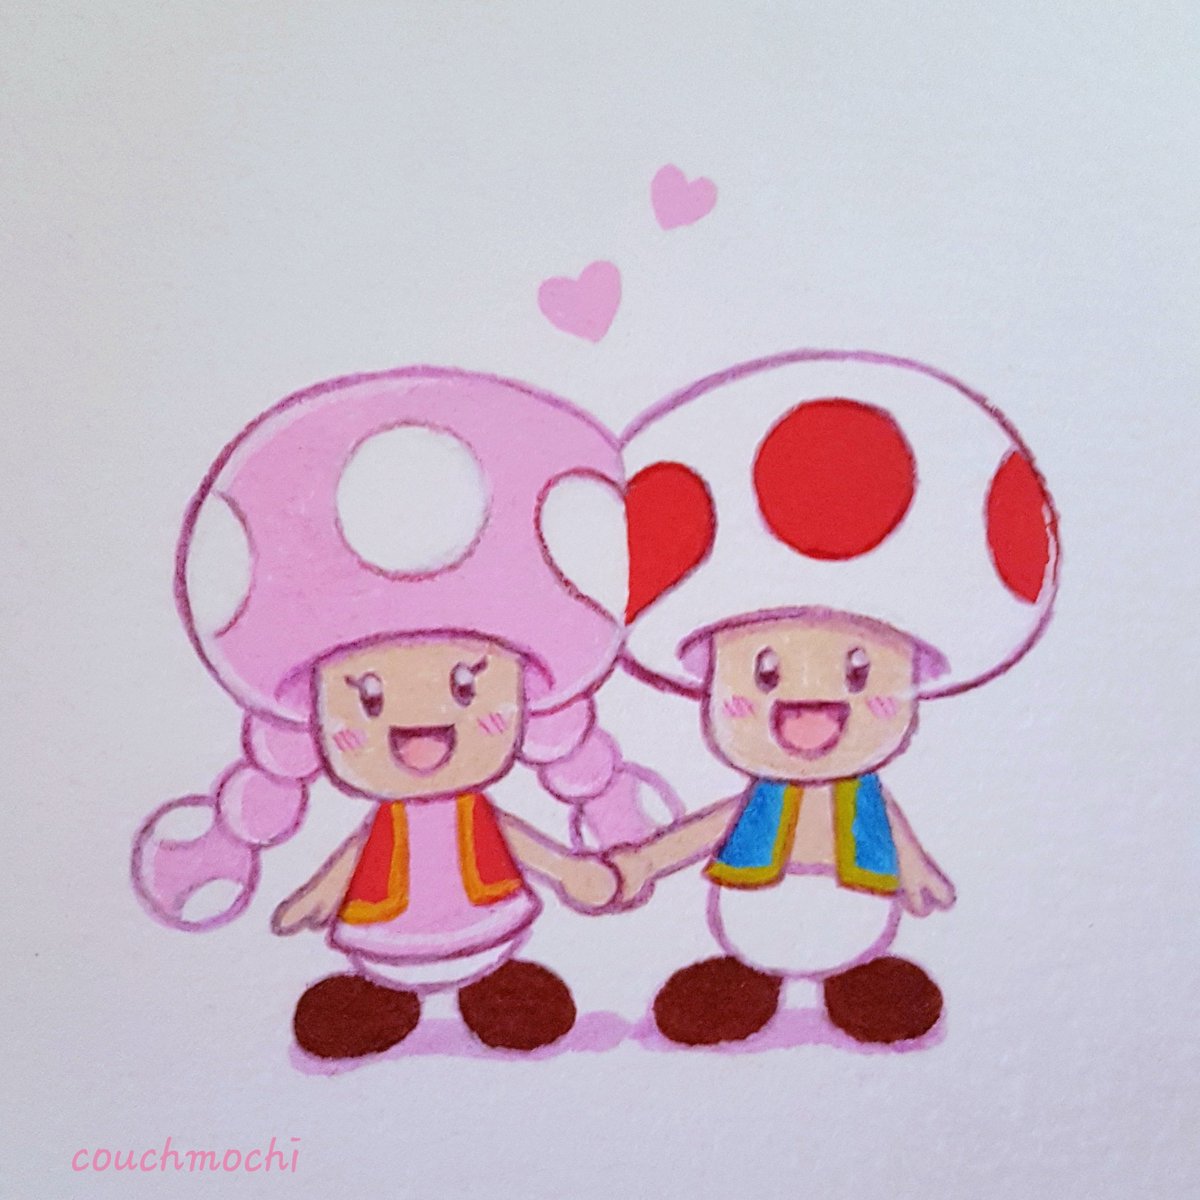 Tosh Did These For My Boyfriend S Valentine S Card Toad Toadette Cute キノピオ キノピコ かわいい